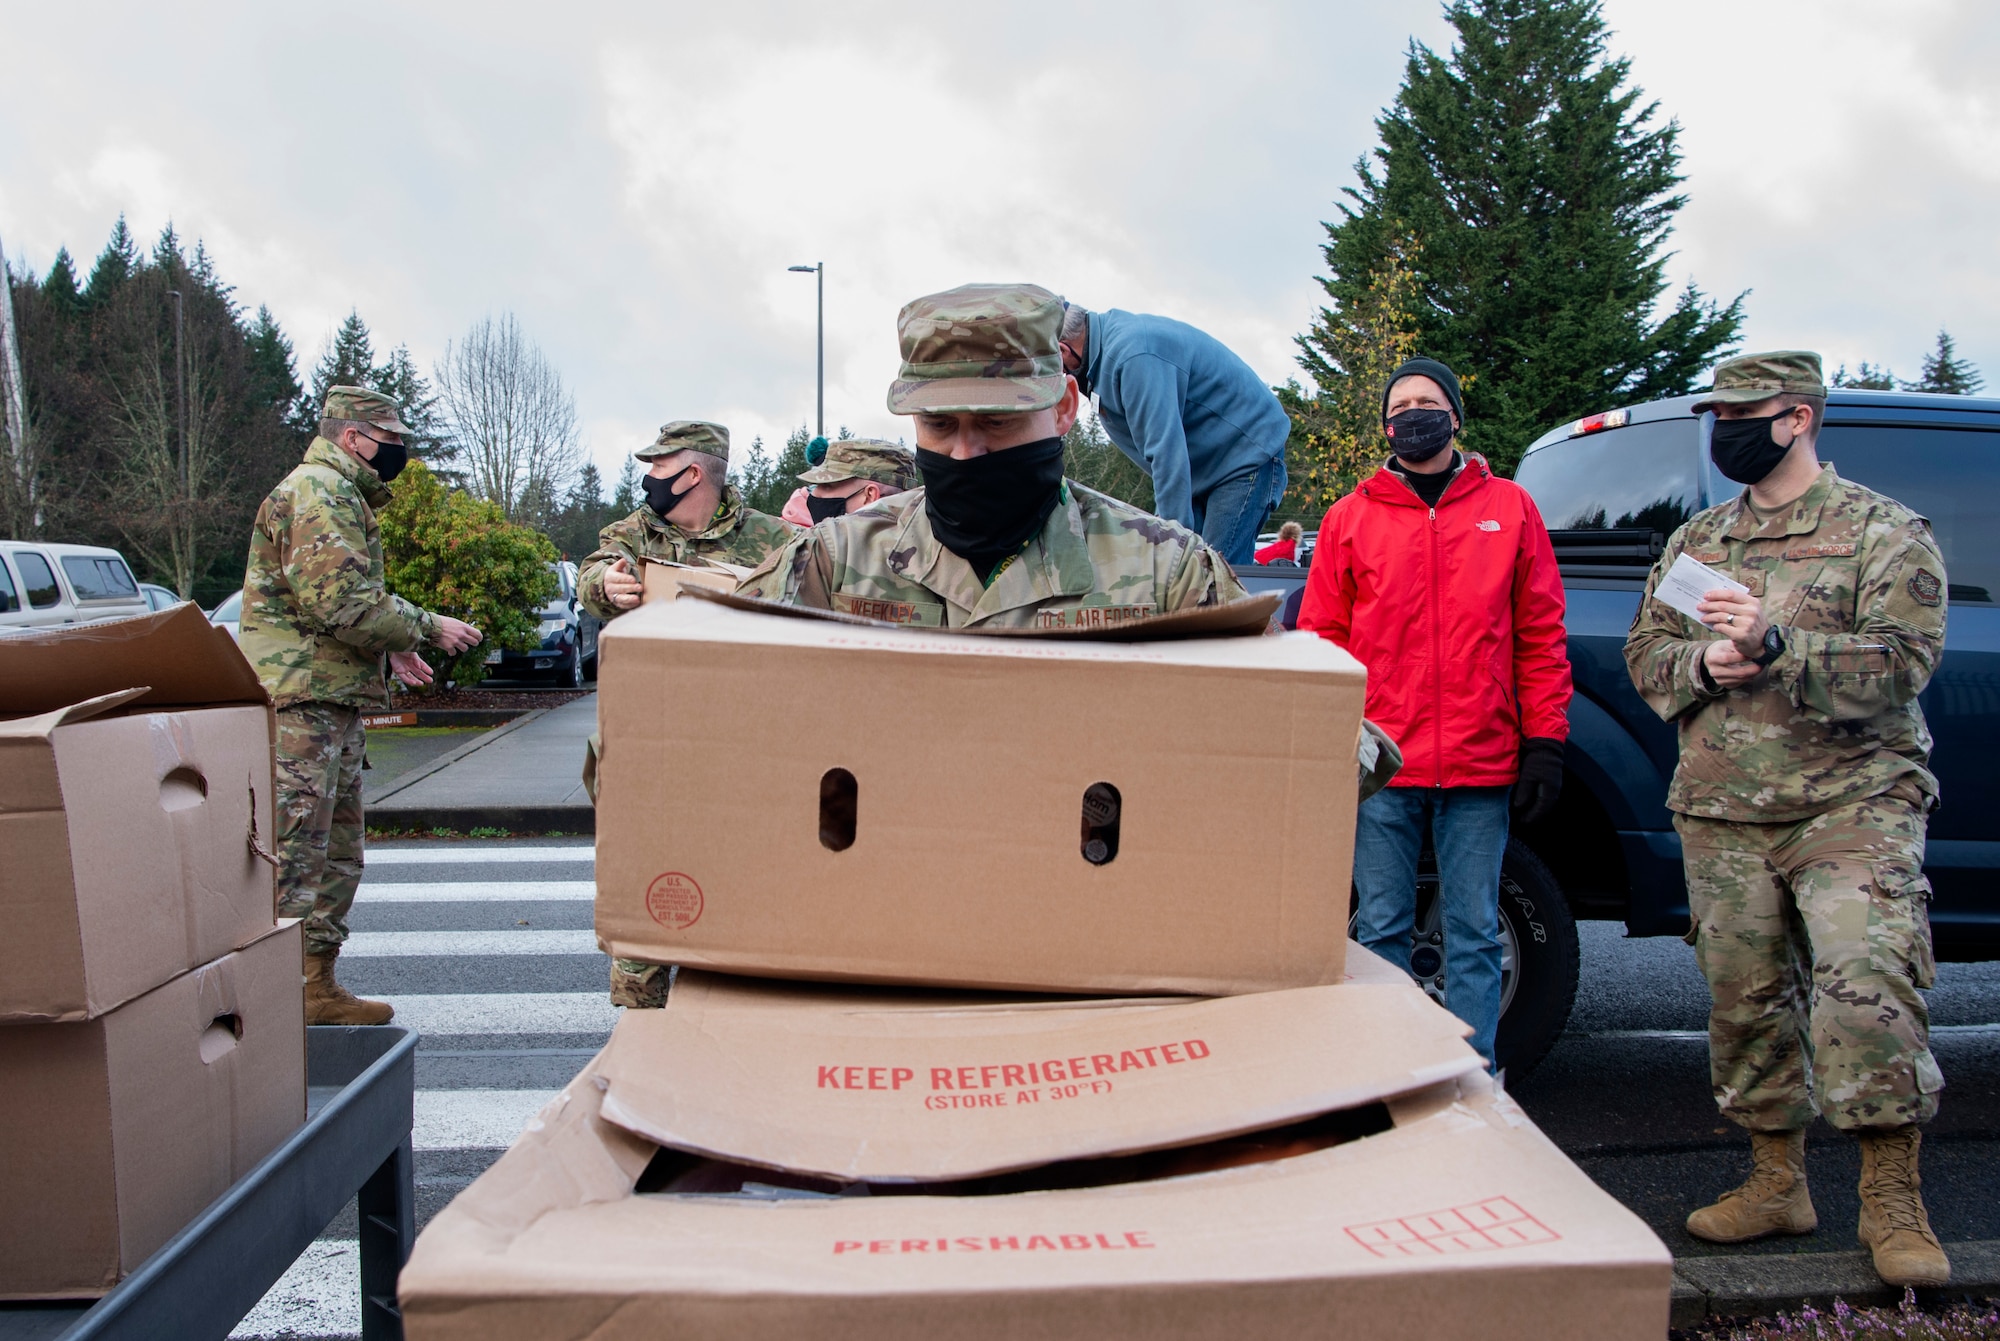 Team McChord Airmen and civilians participate in the Operation Ham Grenade at Joint Base Lewis-McChord, Wash., Dec. 17, 2020. More than 350 hams were donated to Team McChord Airmen and their families during the holidays. (U.S. Air Force photo by Senior Airman Tryphena Mayhugh)